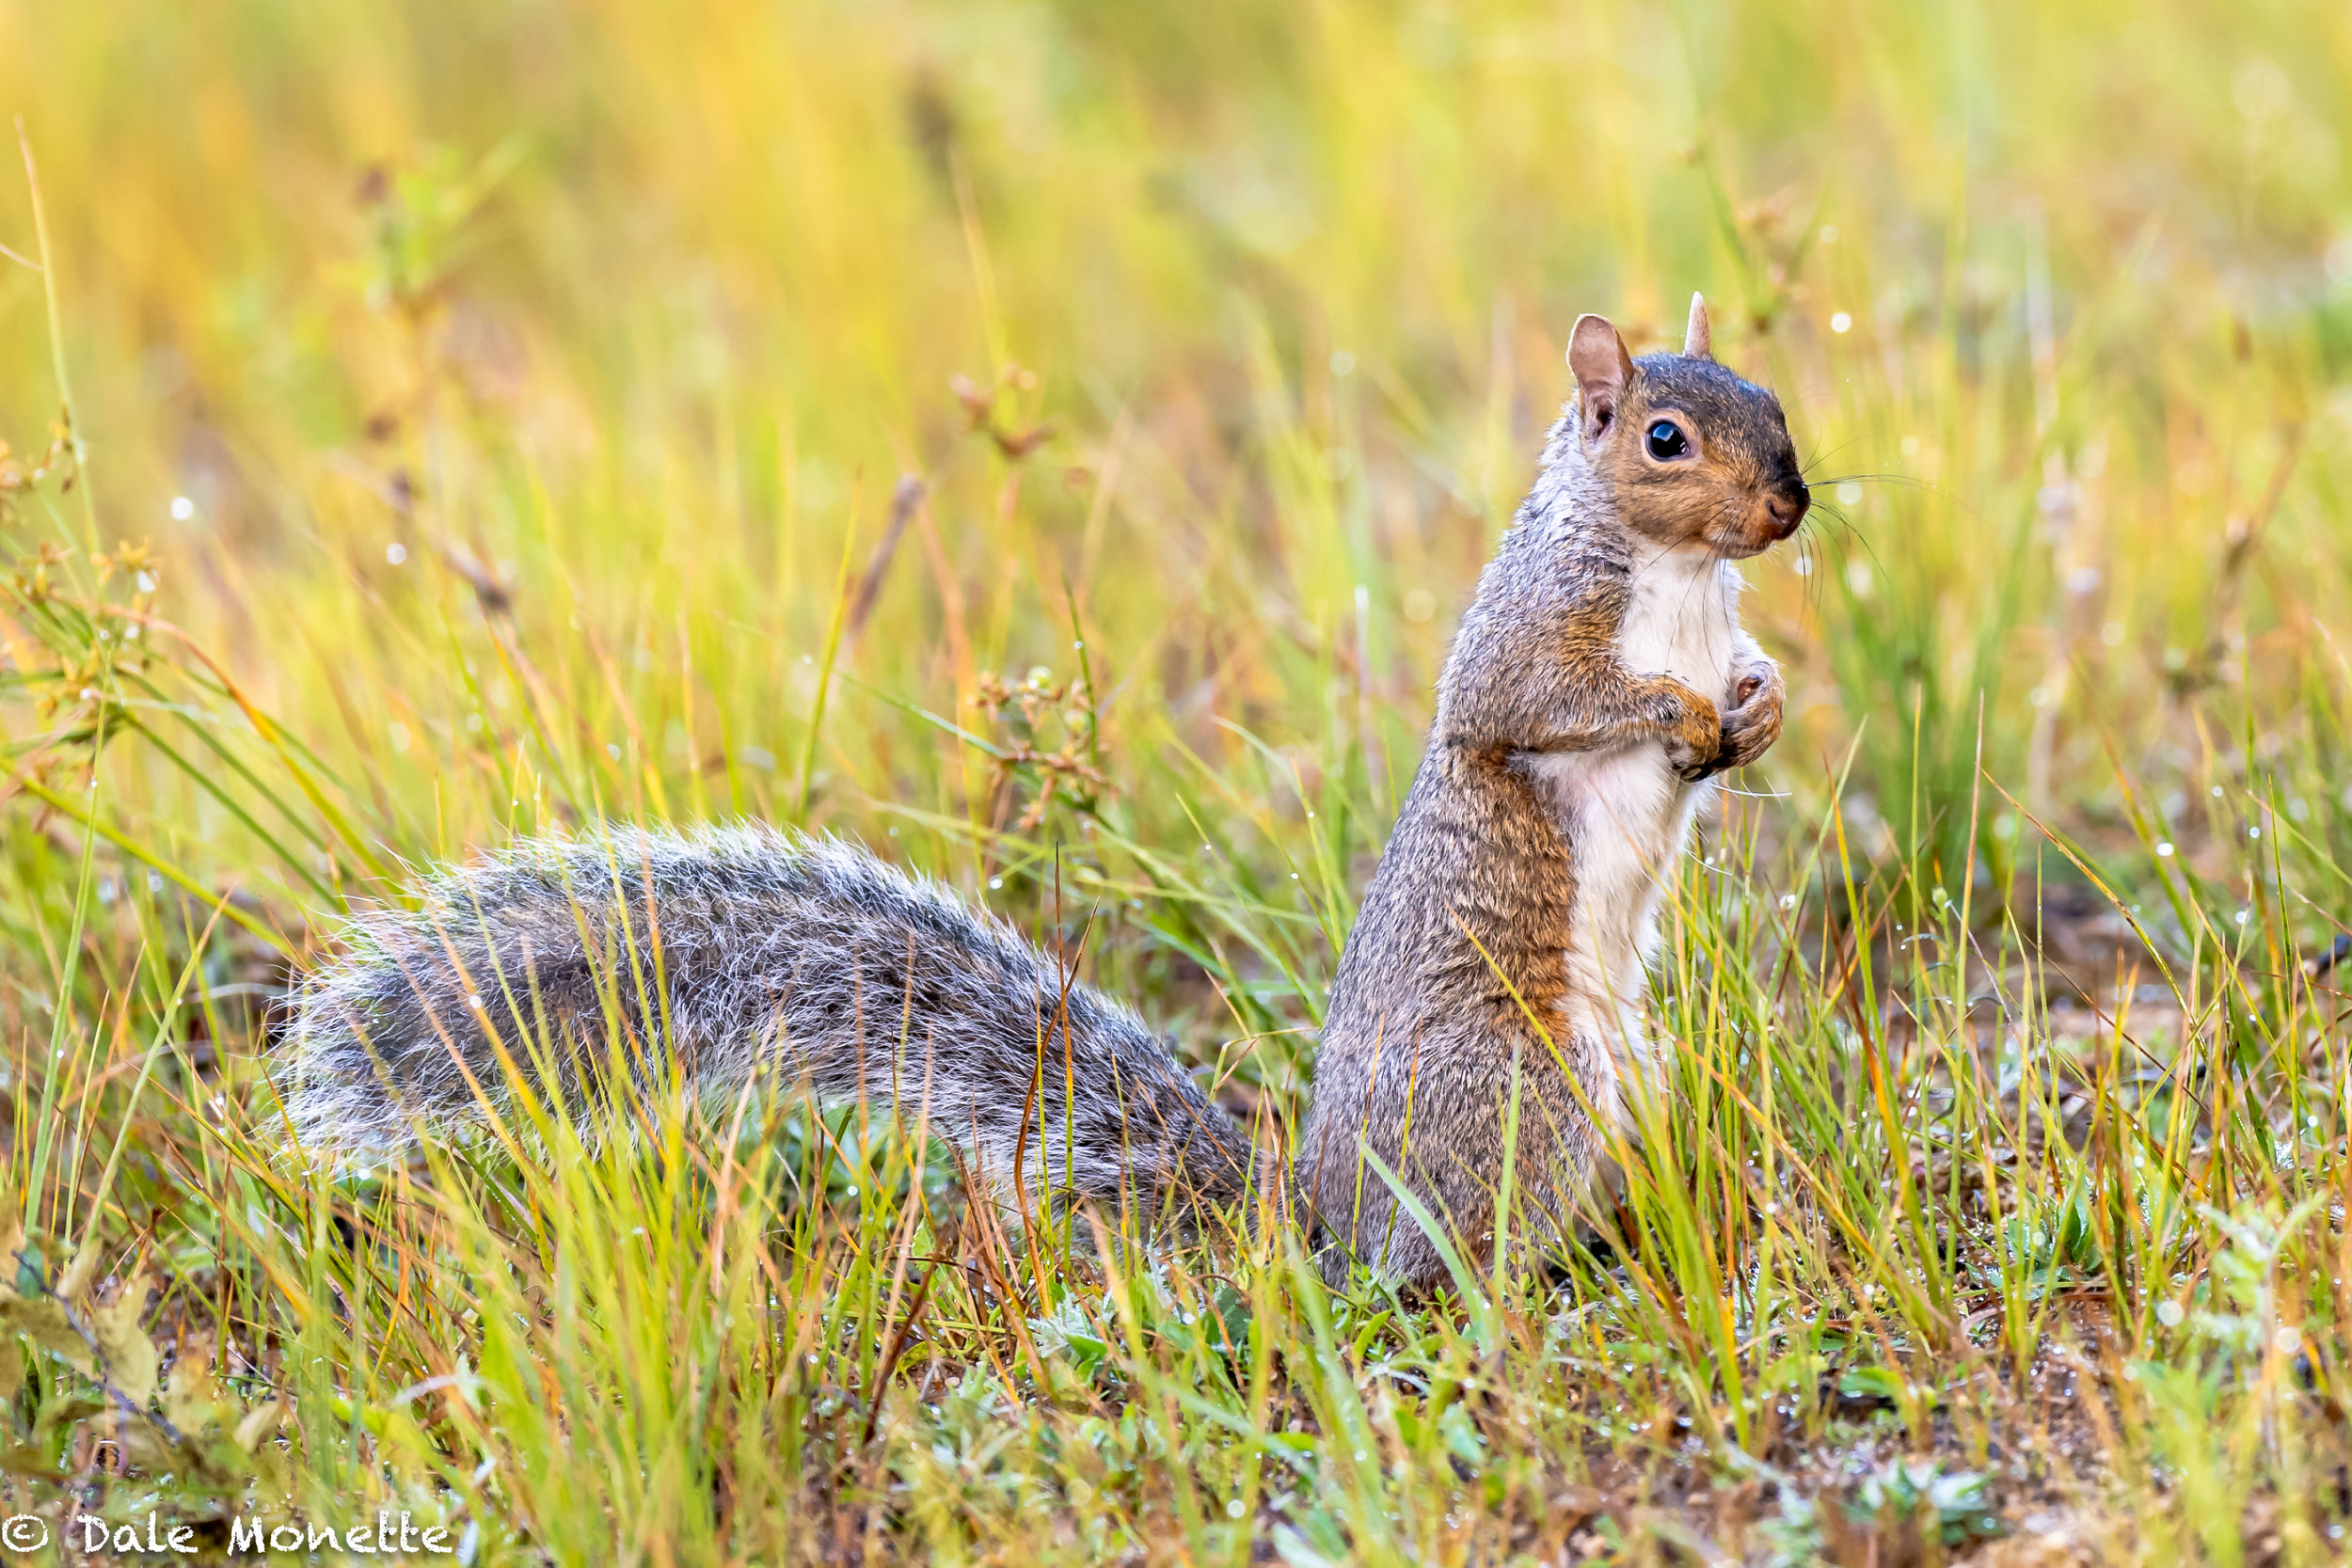   Have you noticed the abundance of squirrels this year, both alive and dead on the roads?  So many were born this spring because of the great food supplies last fall the population grew. Now they are all having problems finding food.    